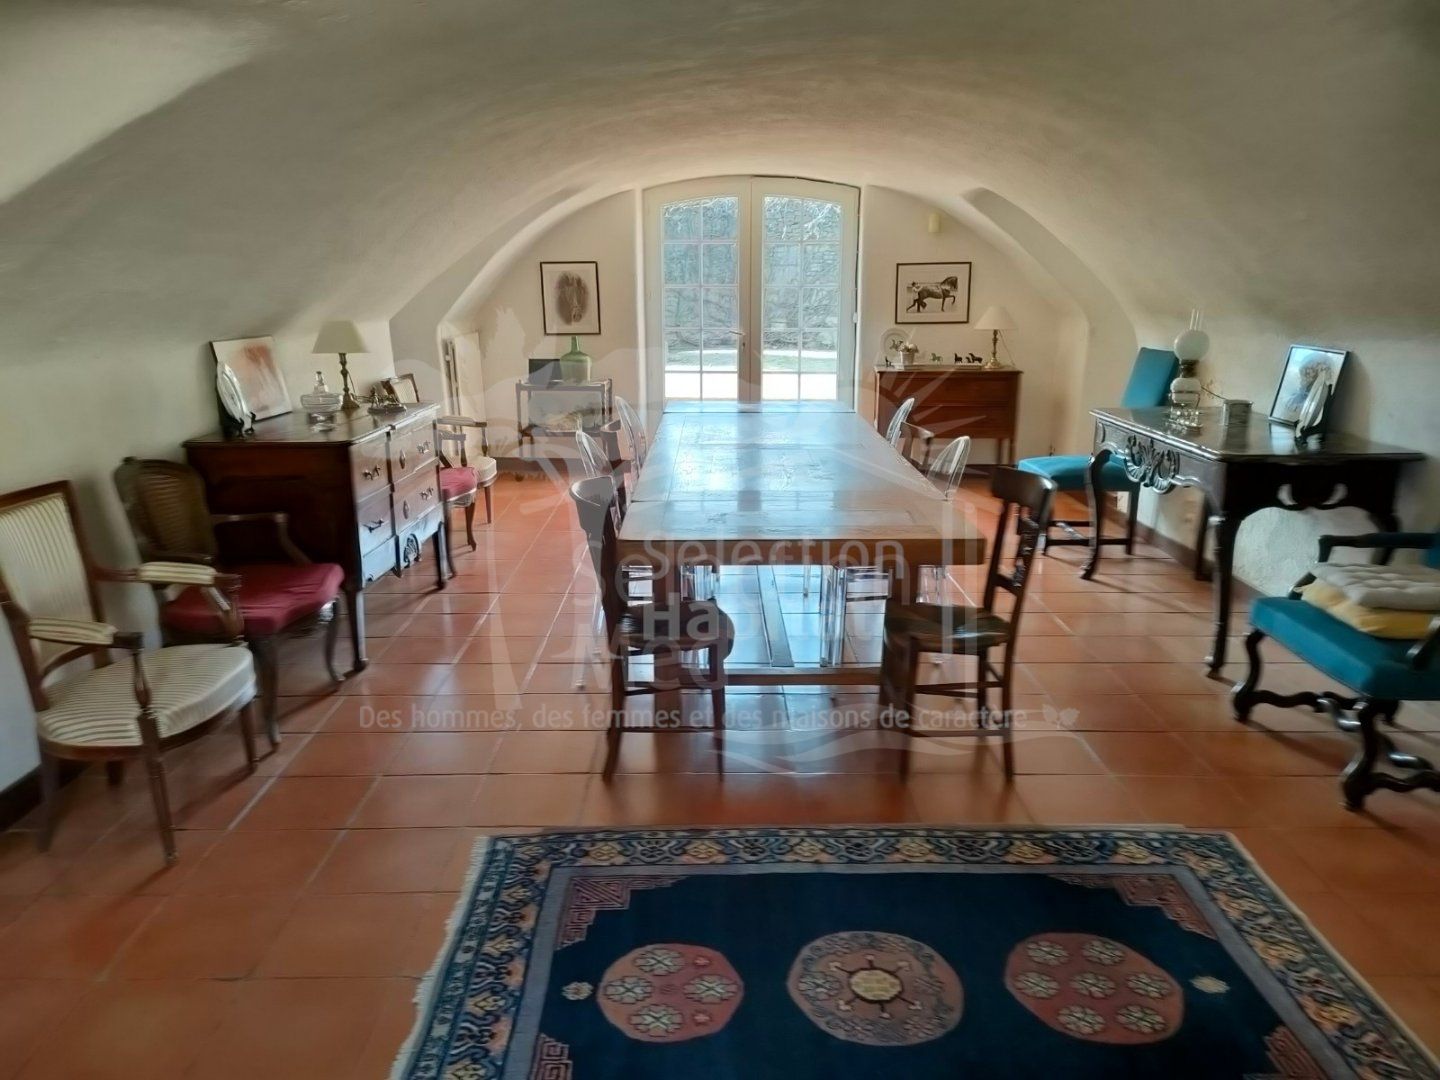 Superb Property from the 12 th century , organic 195 Acres , several residential houses, exploited vineyards, in the heart of the minervois...